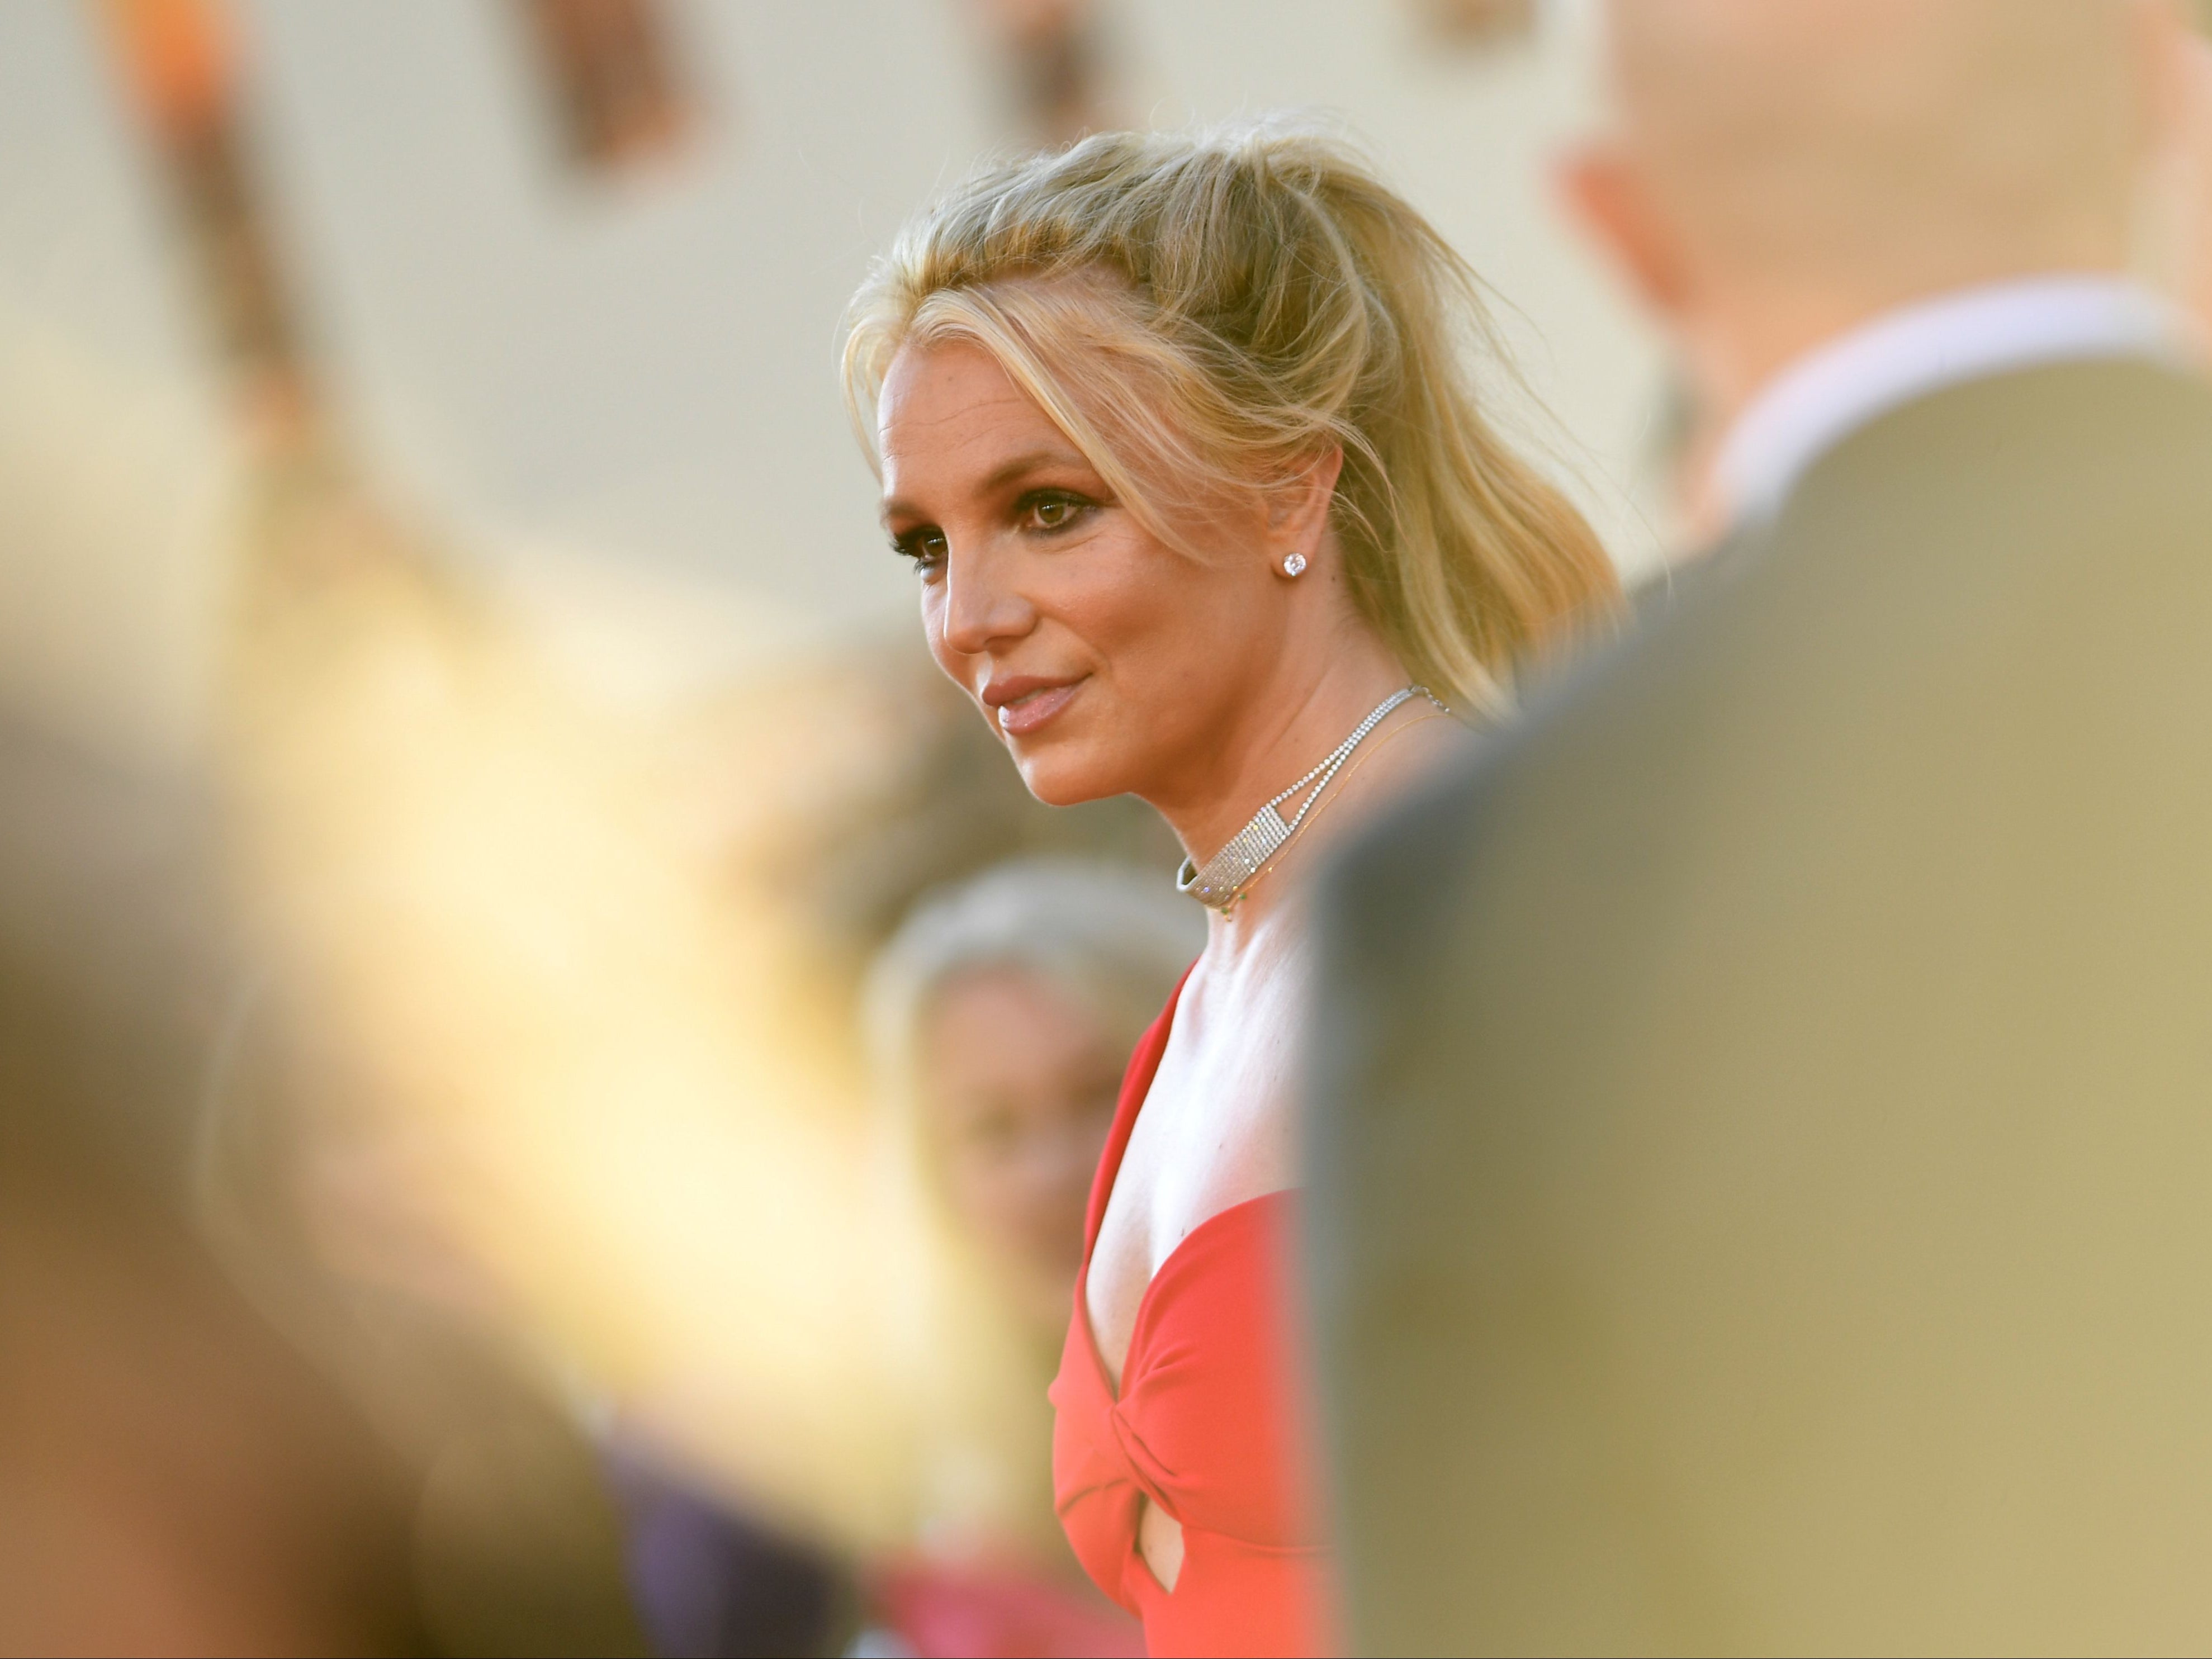 ‘I worked seven days a week, no days off, which in California, the only similar thing to this is called sex trafficking,’ Spears said in a bombshell 23-minute speech